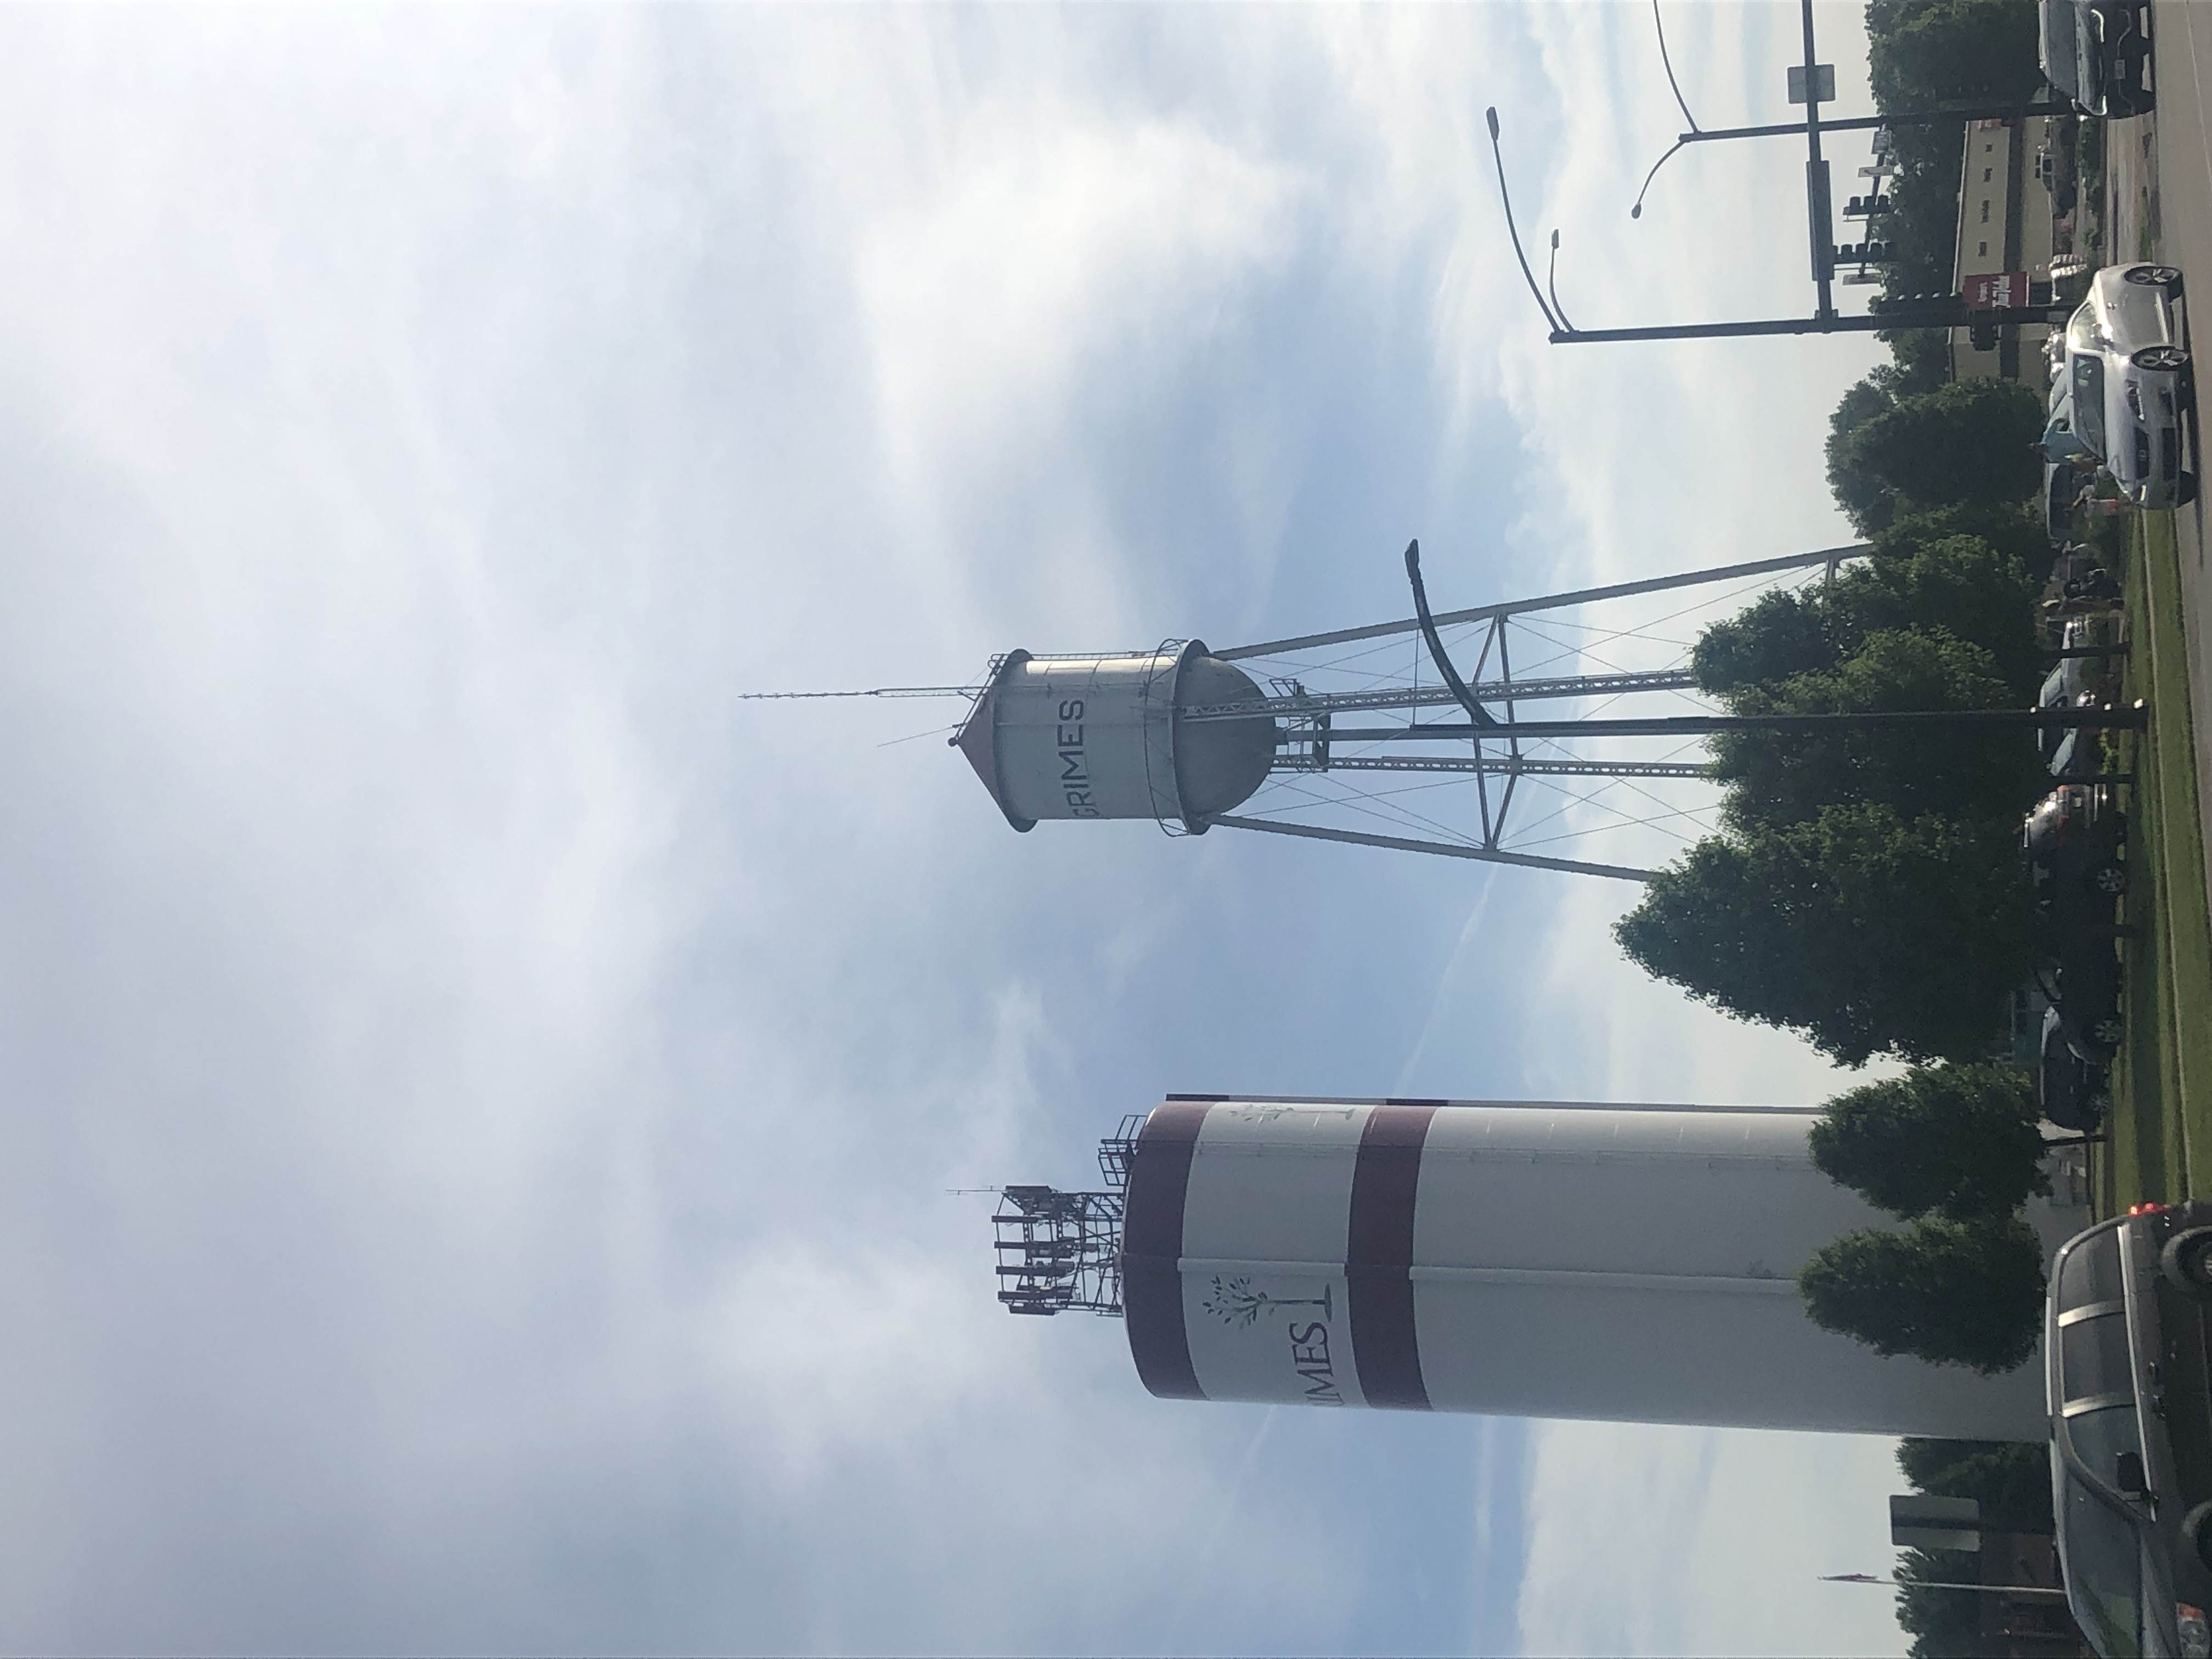 Grimes Water Tower